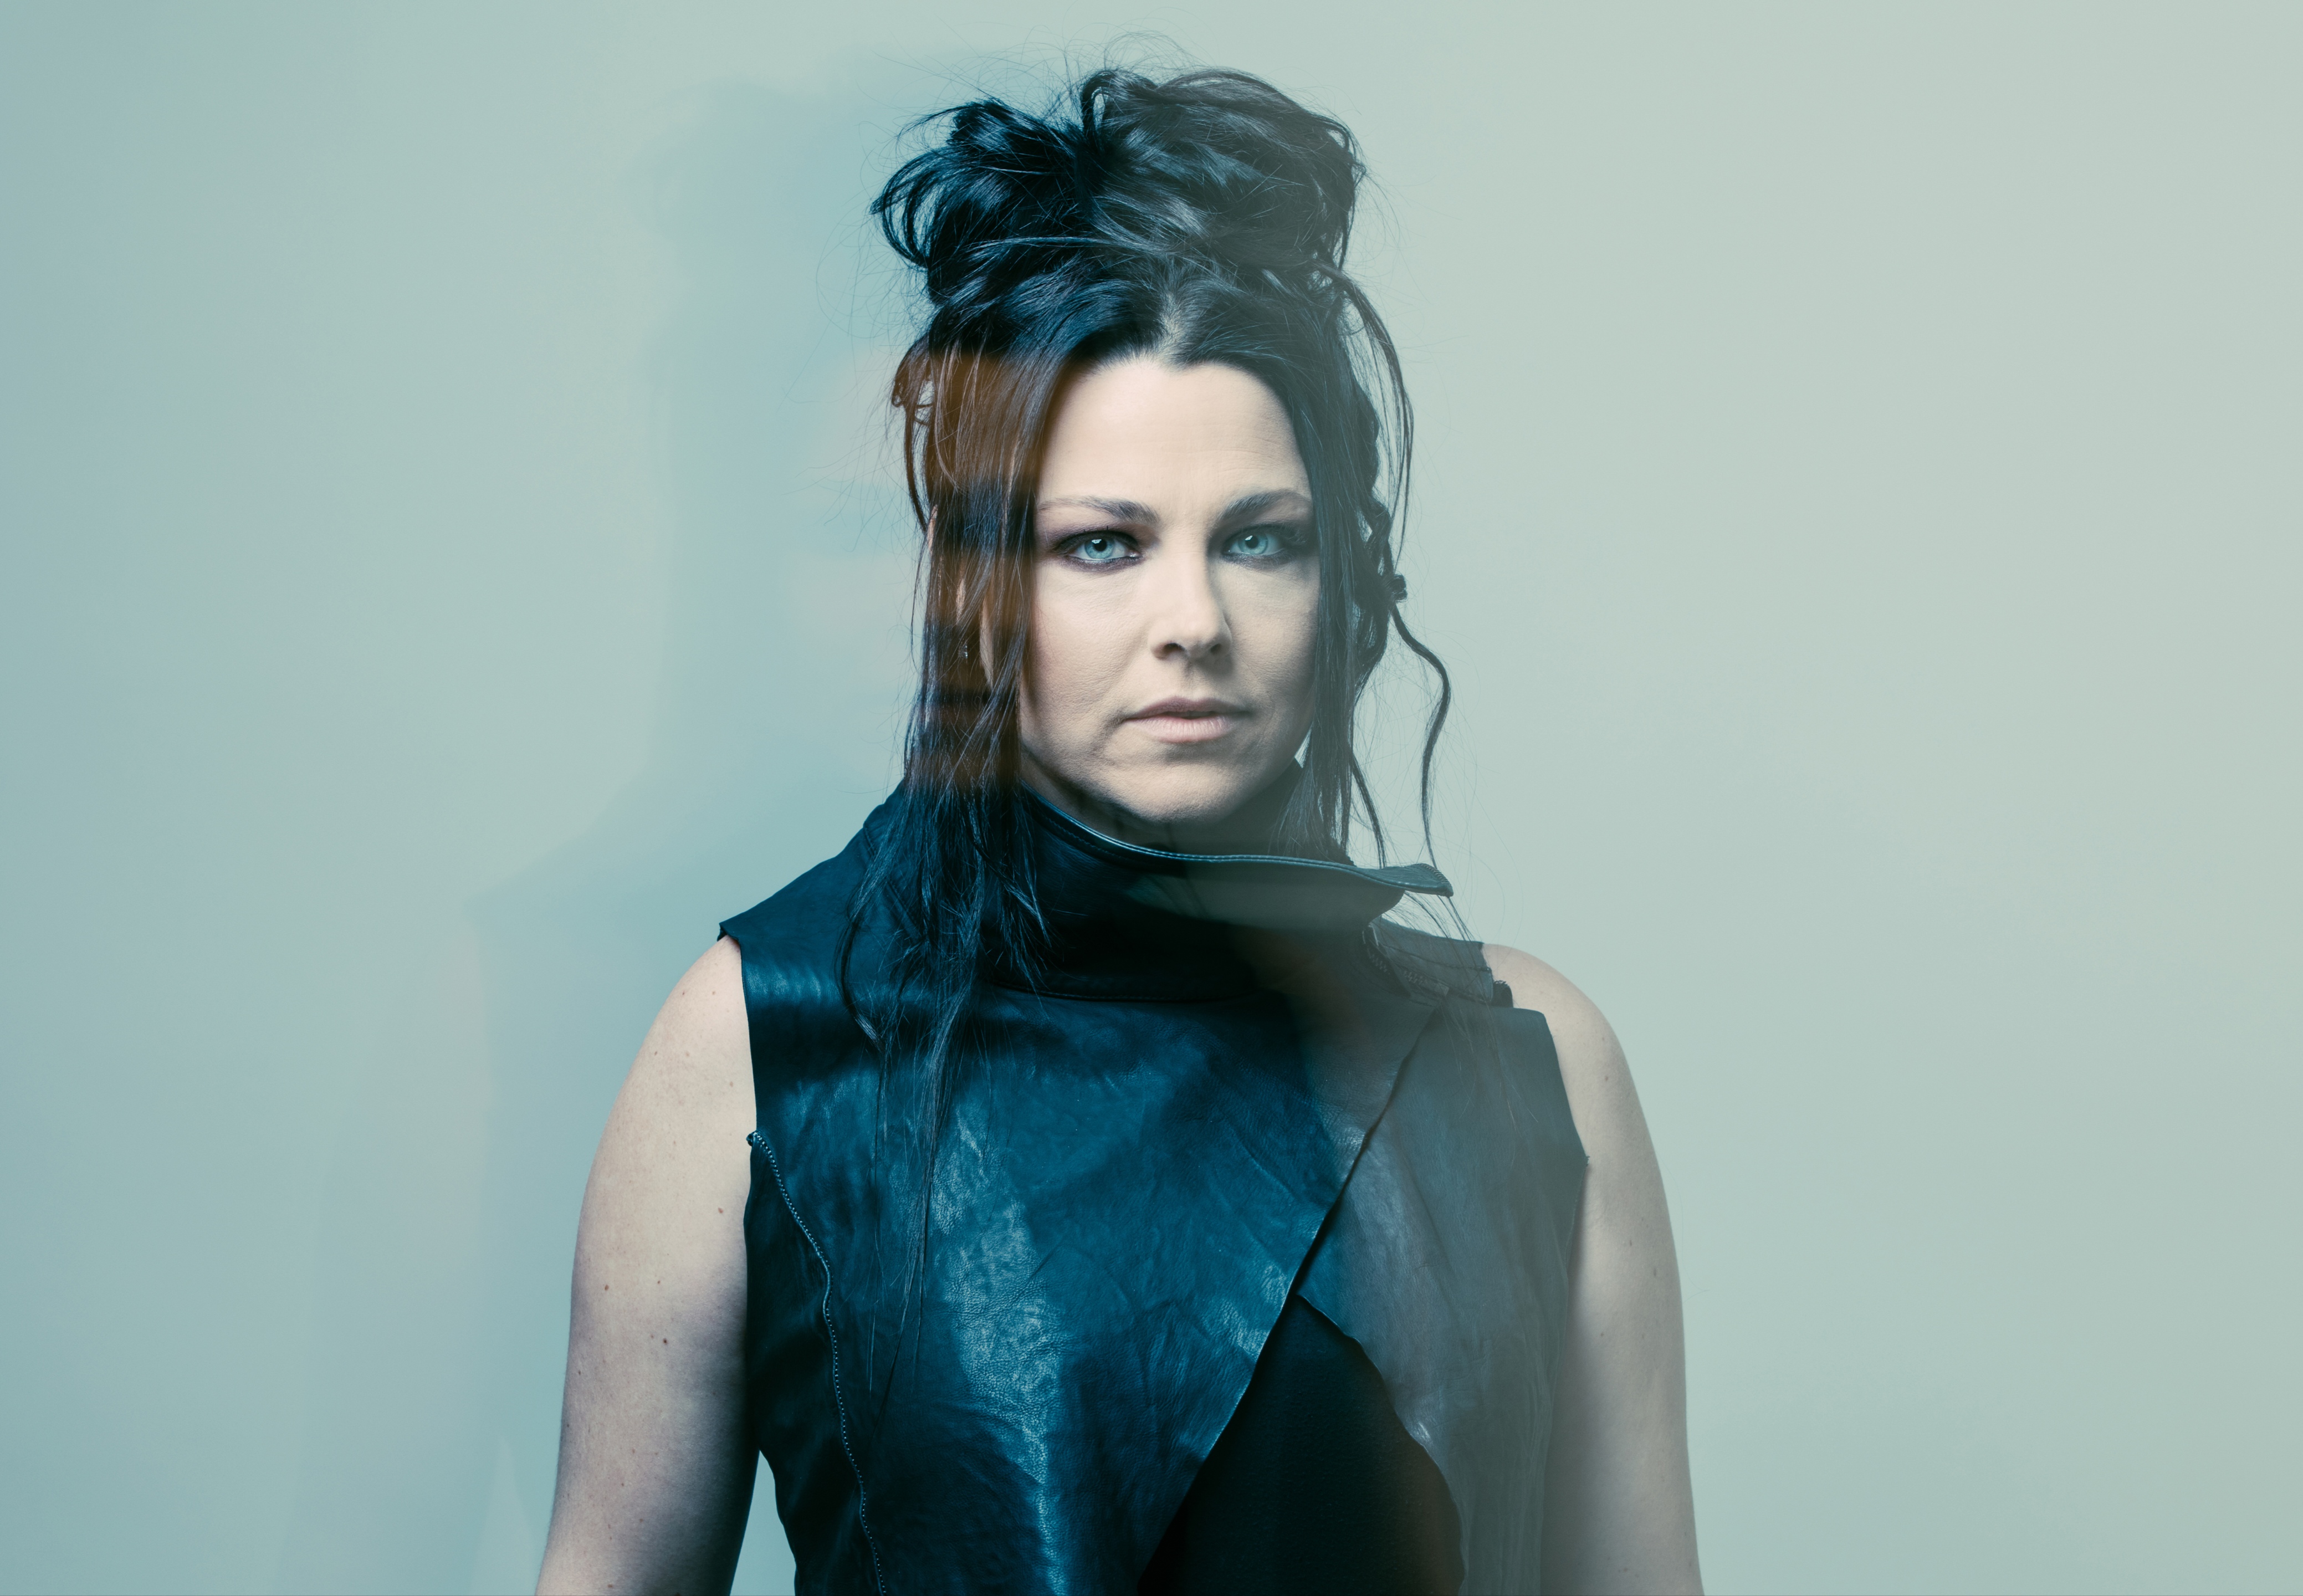 4156x2880
Keywords: amy lee;blue;photoshoot;the bitter truth;sesion;hq